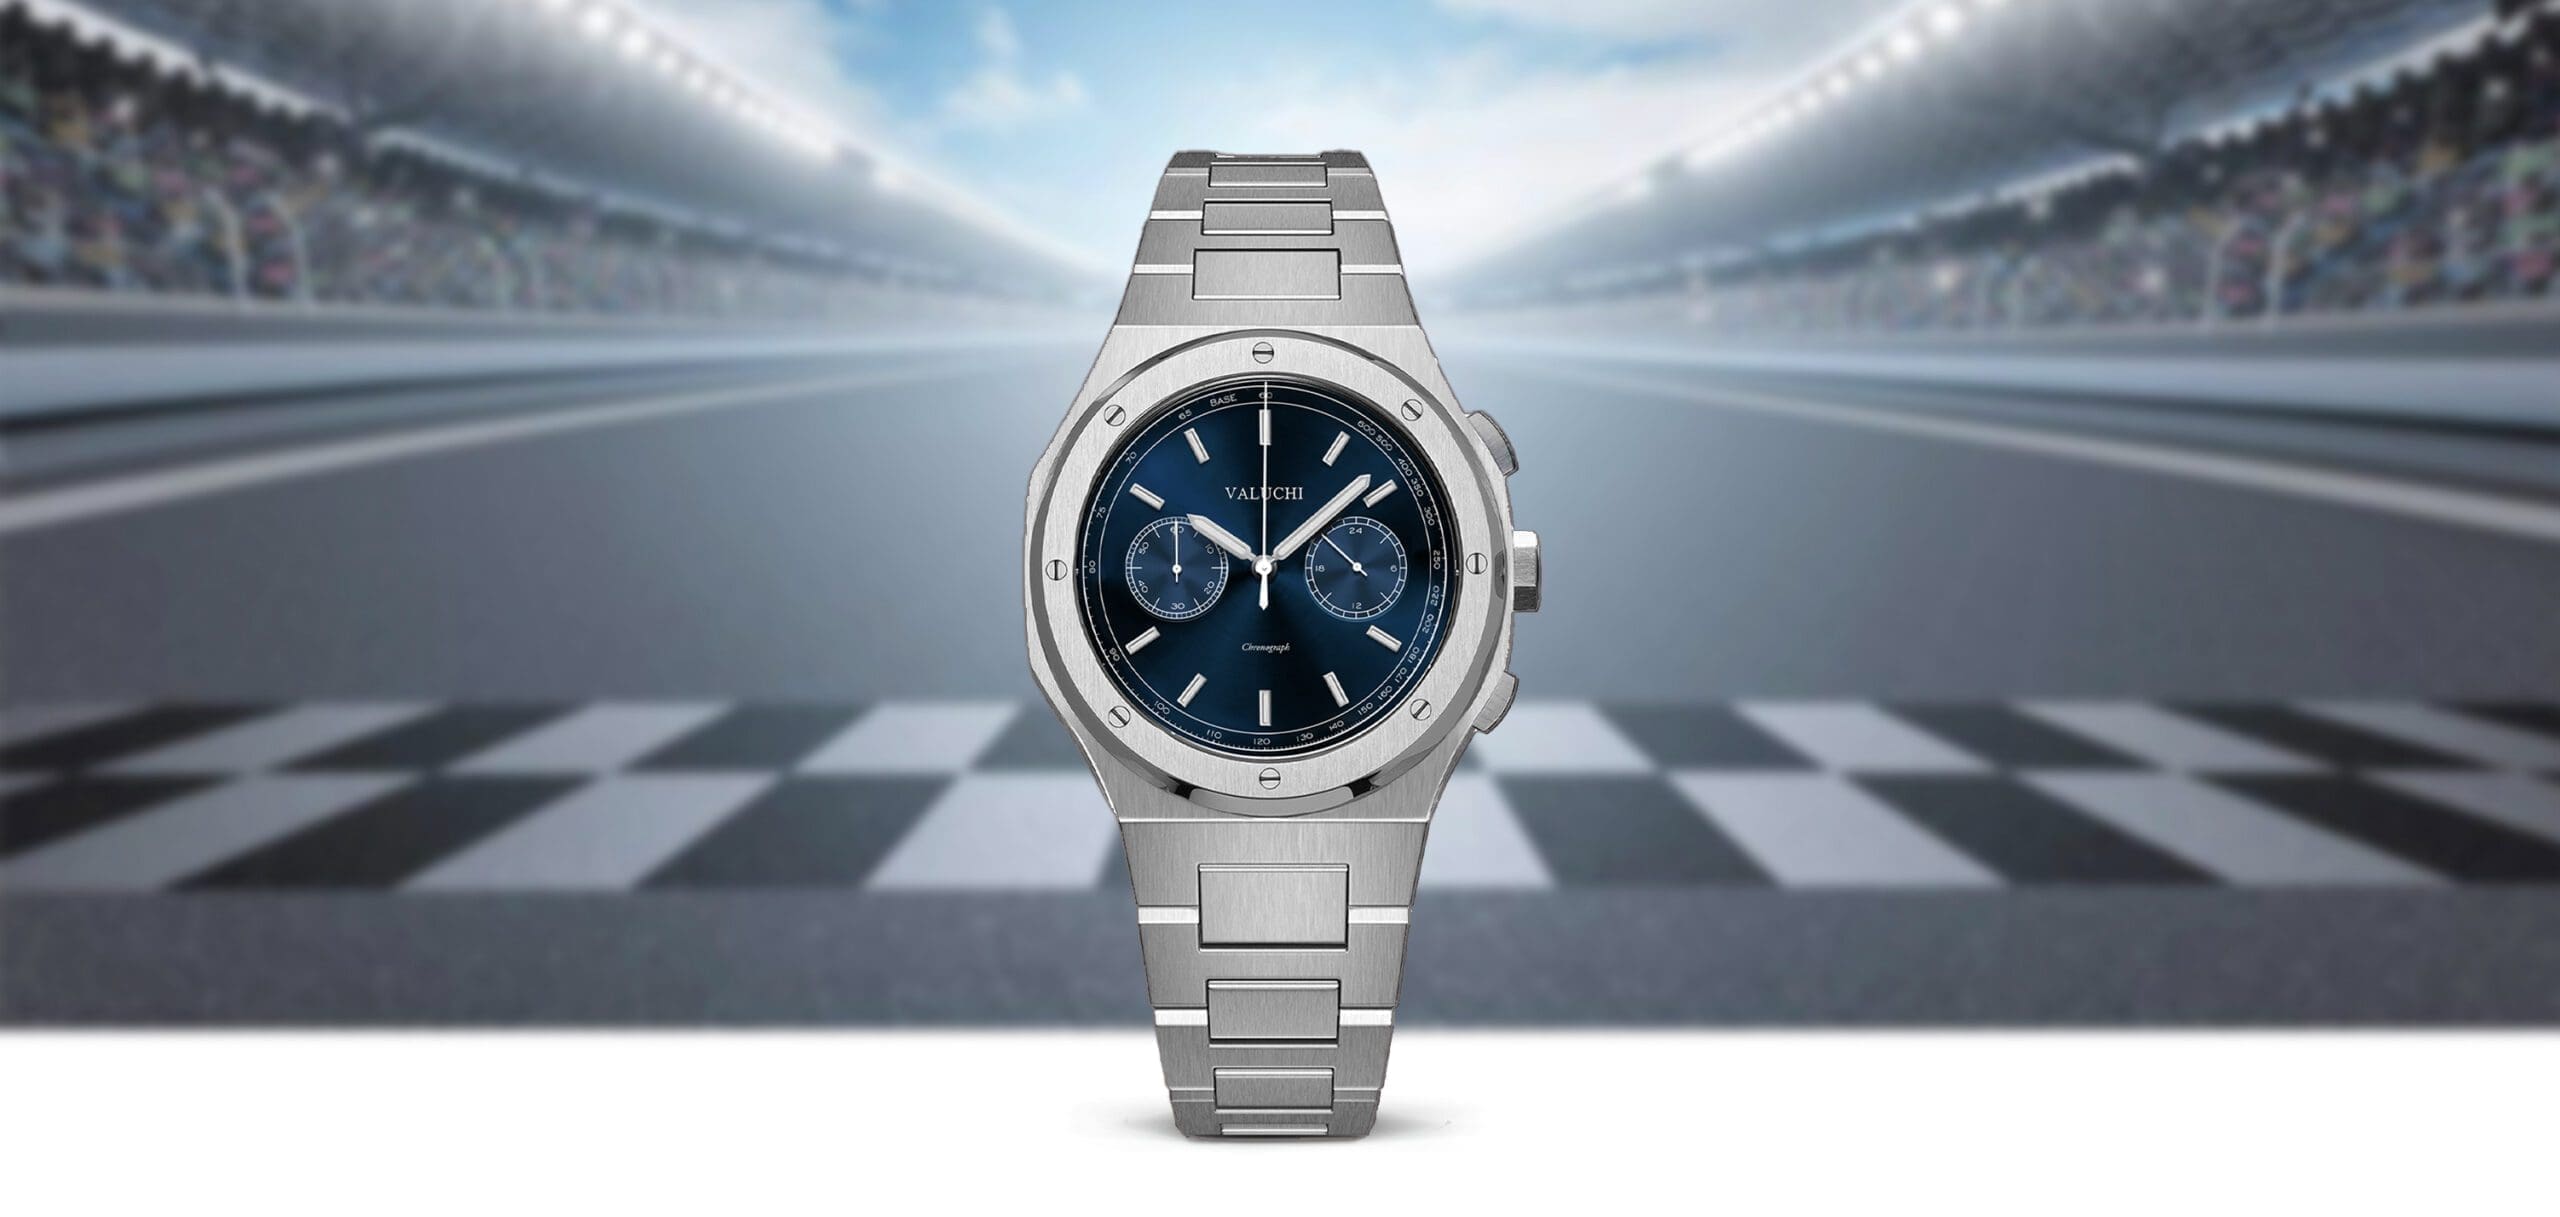 Elegant silver chronograph watch with blue accents